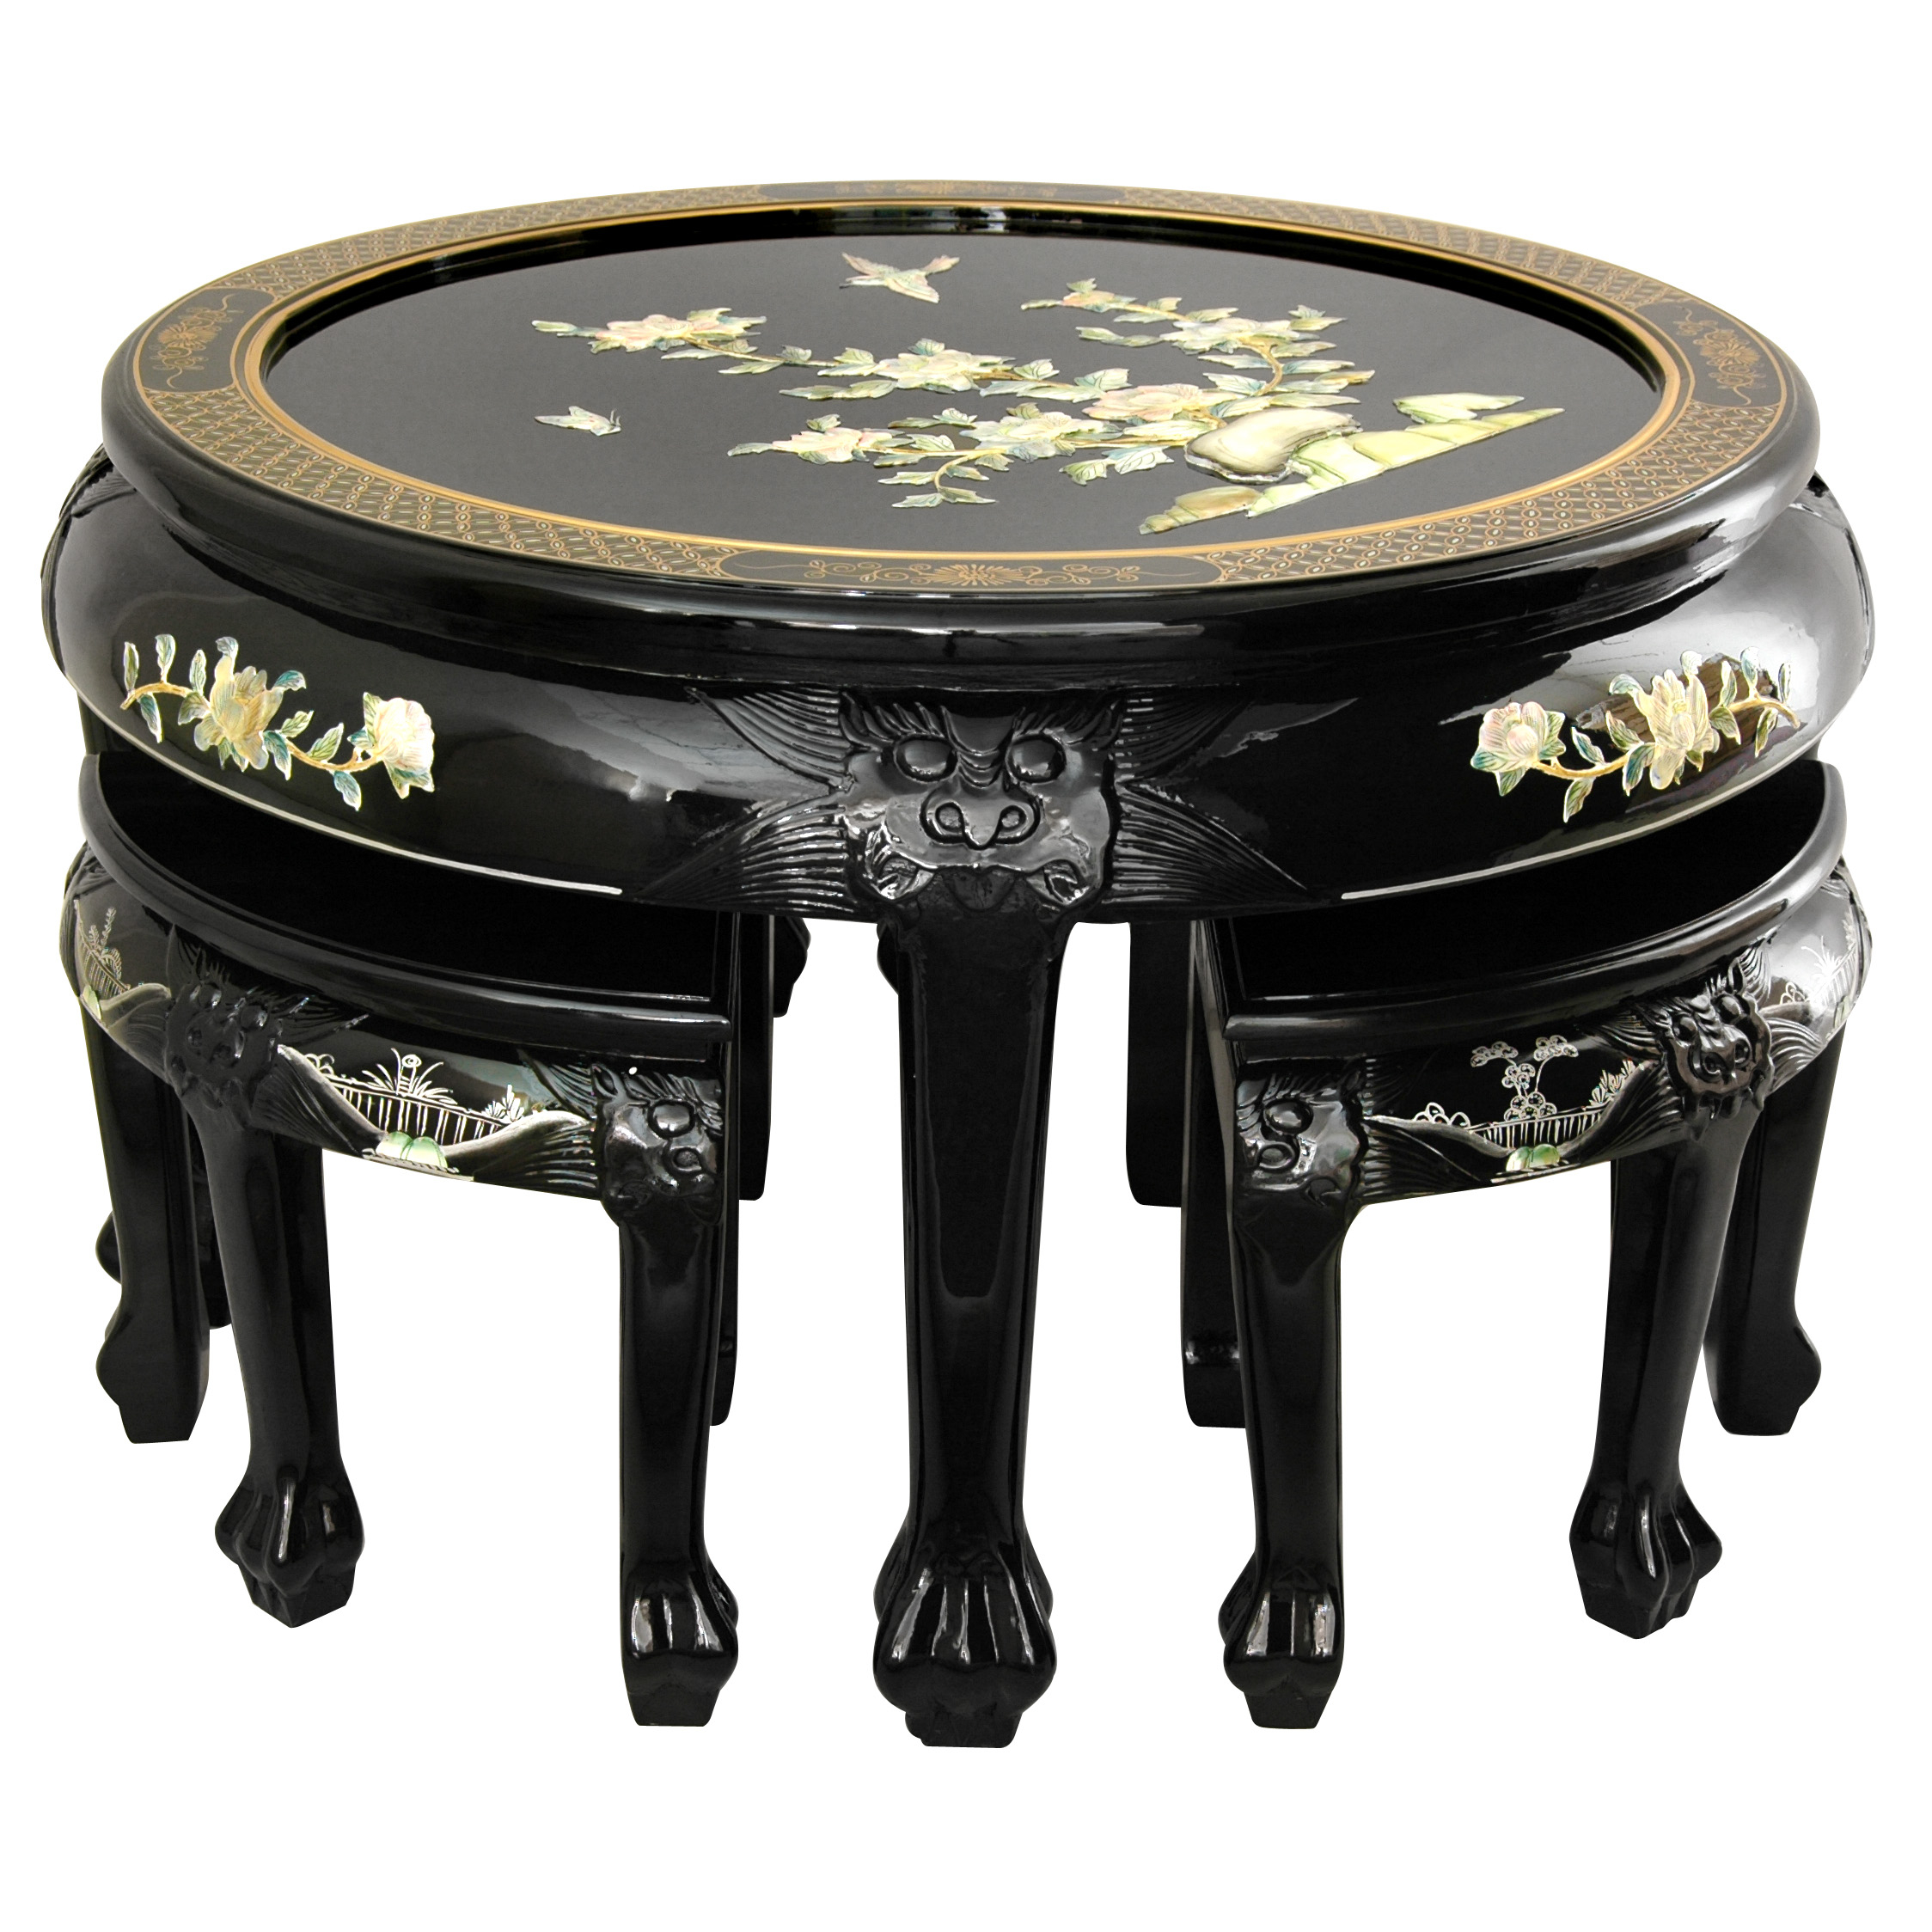 Oriental Furniture Asian Furniture and Decor 32-Inch Black Lacquer Mother of Pearl Round Coffee Table with Stools